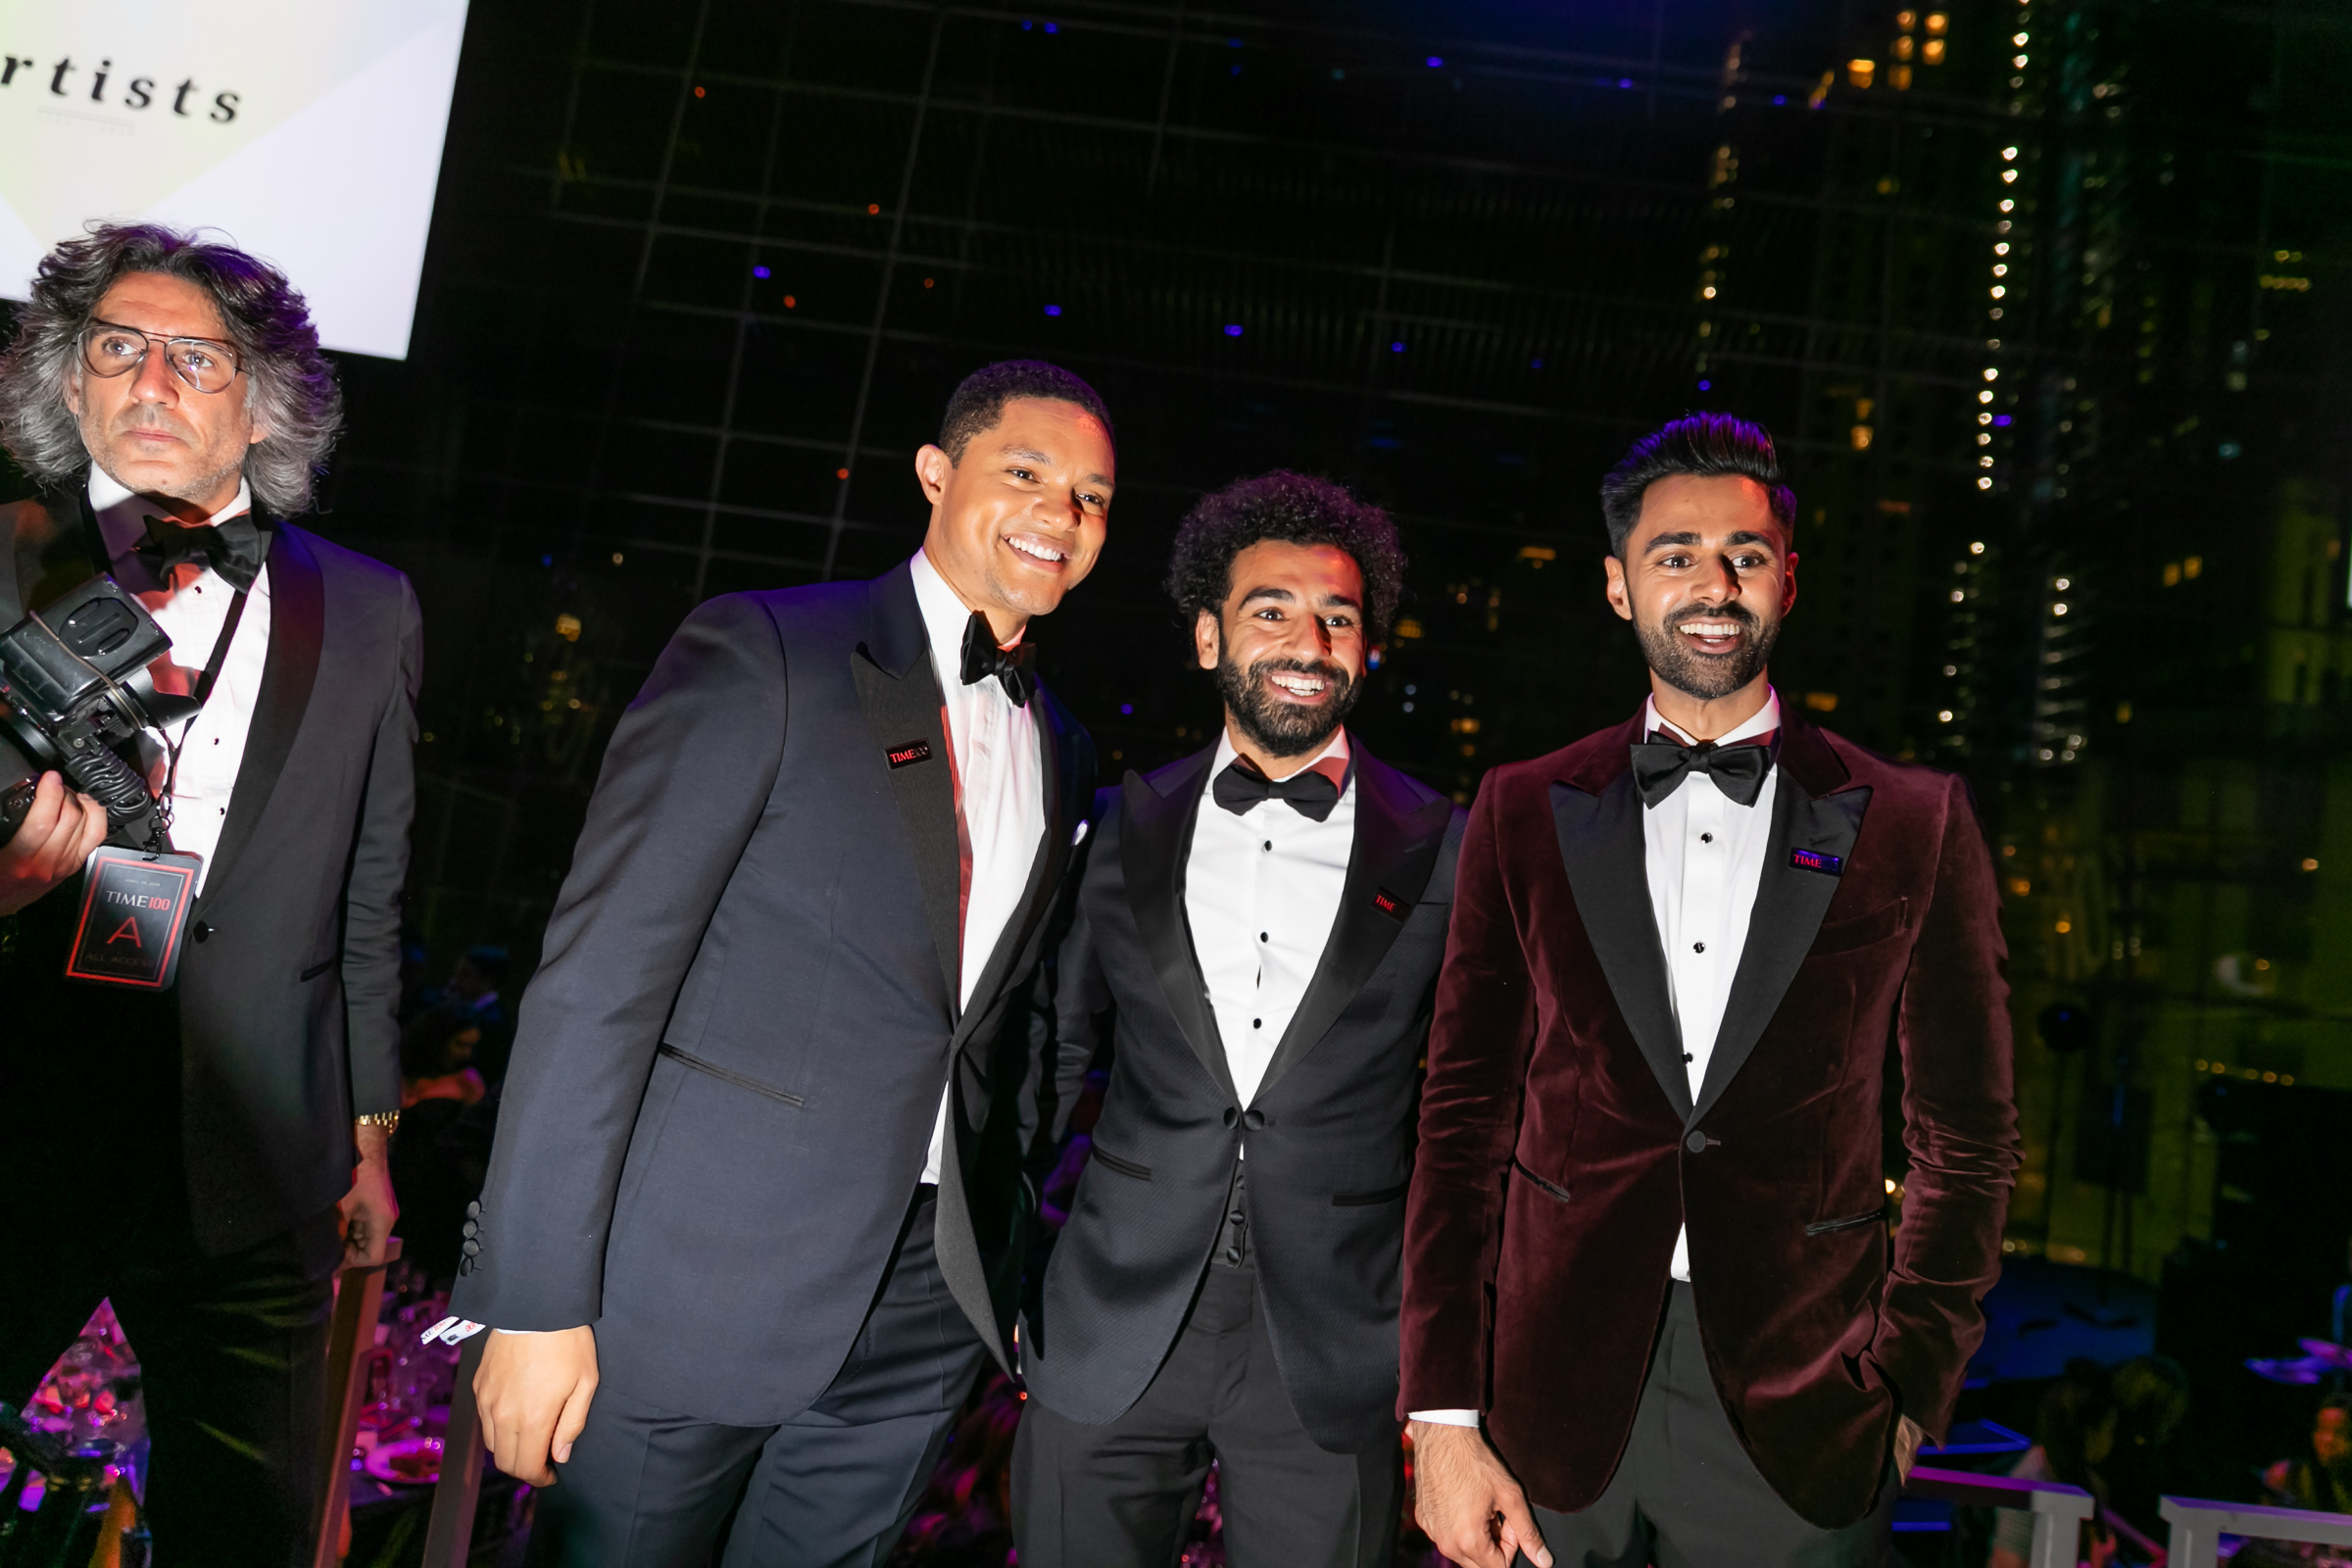 Trevor Noah, Mohamed Salah and Hasan Minaj at the Time 100 Gala at Jazz at Lincoln Center in New York City on April 23, 2019. (Kevin Tachman for TIME)